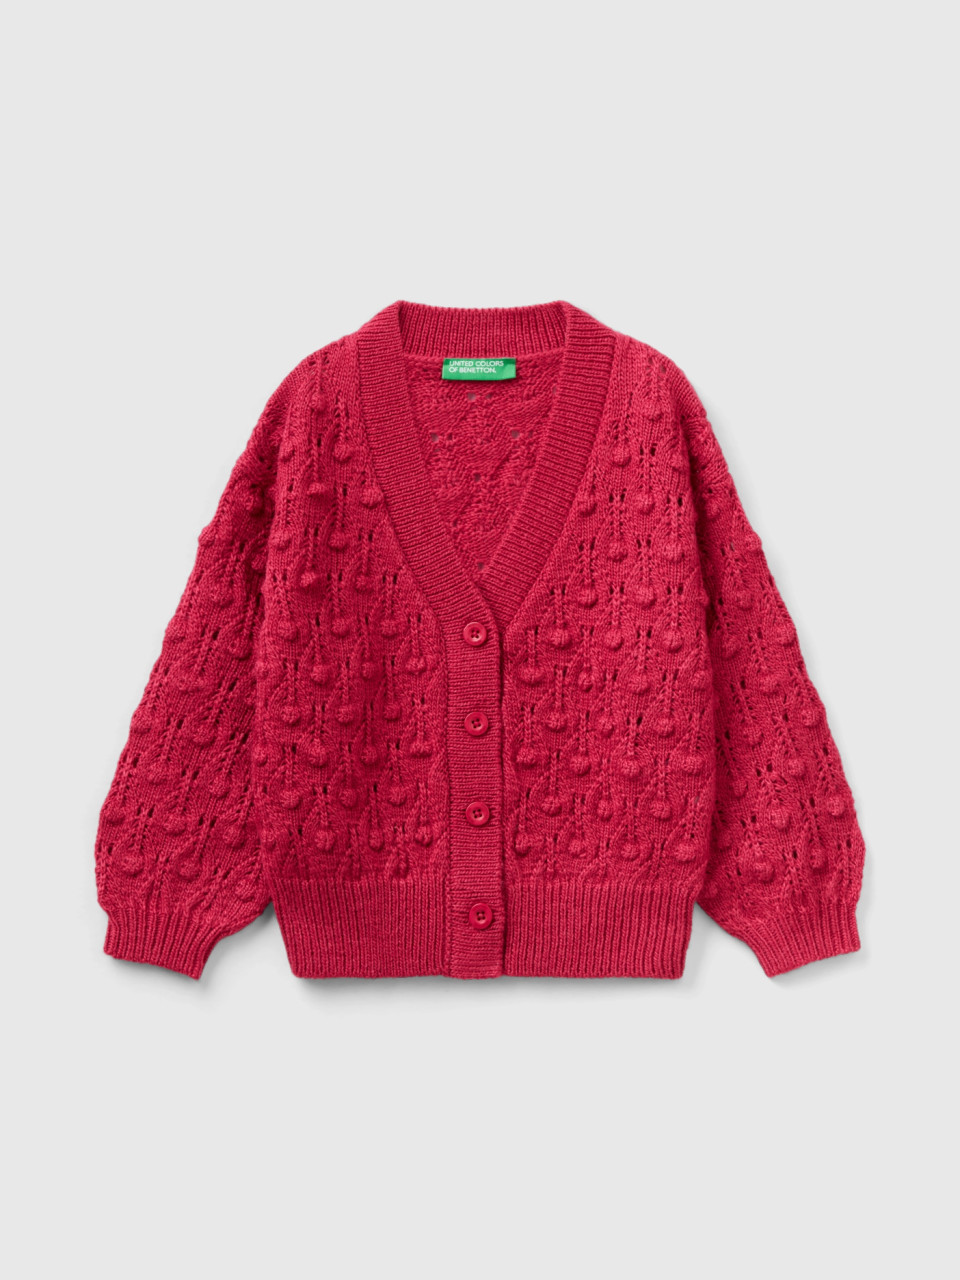 Benetton, Knit Cardigan With Buttons, Cyclamen, Kids